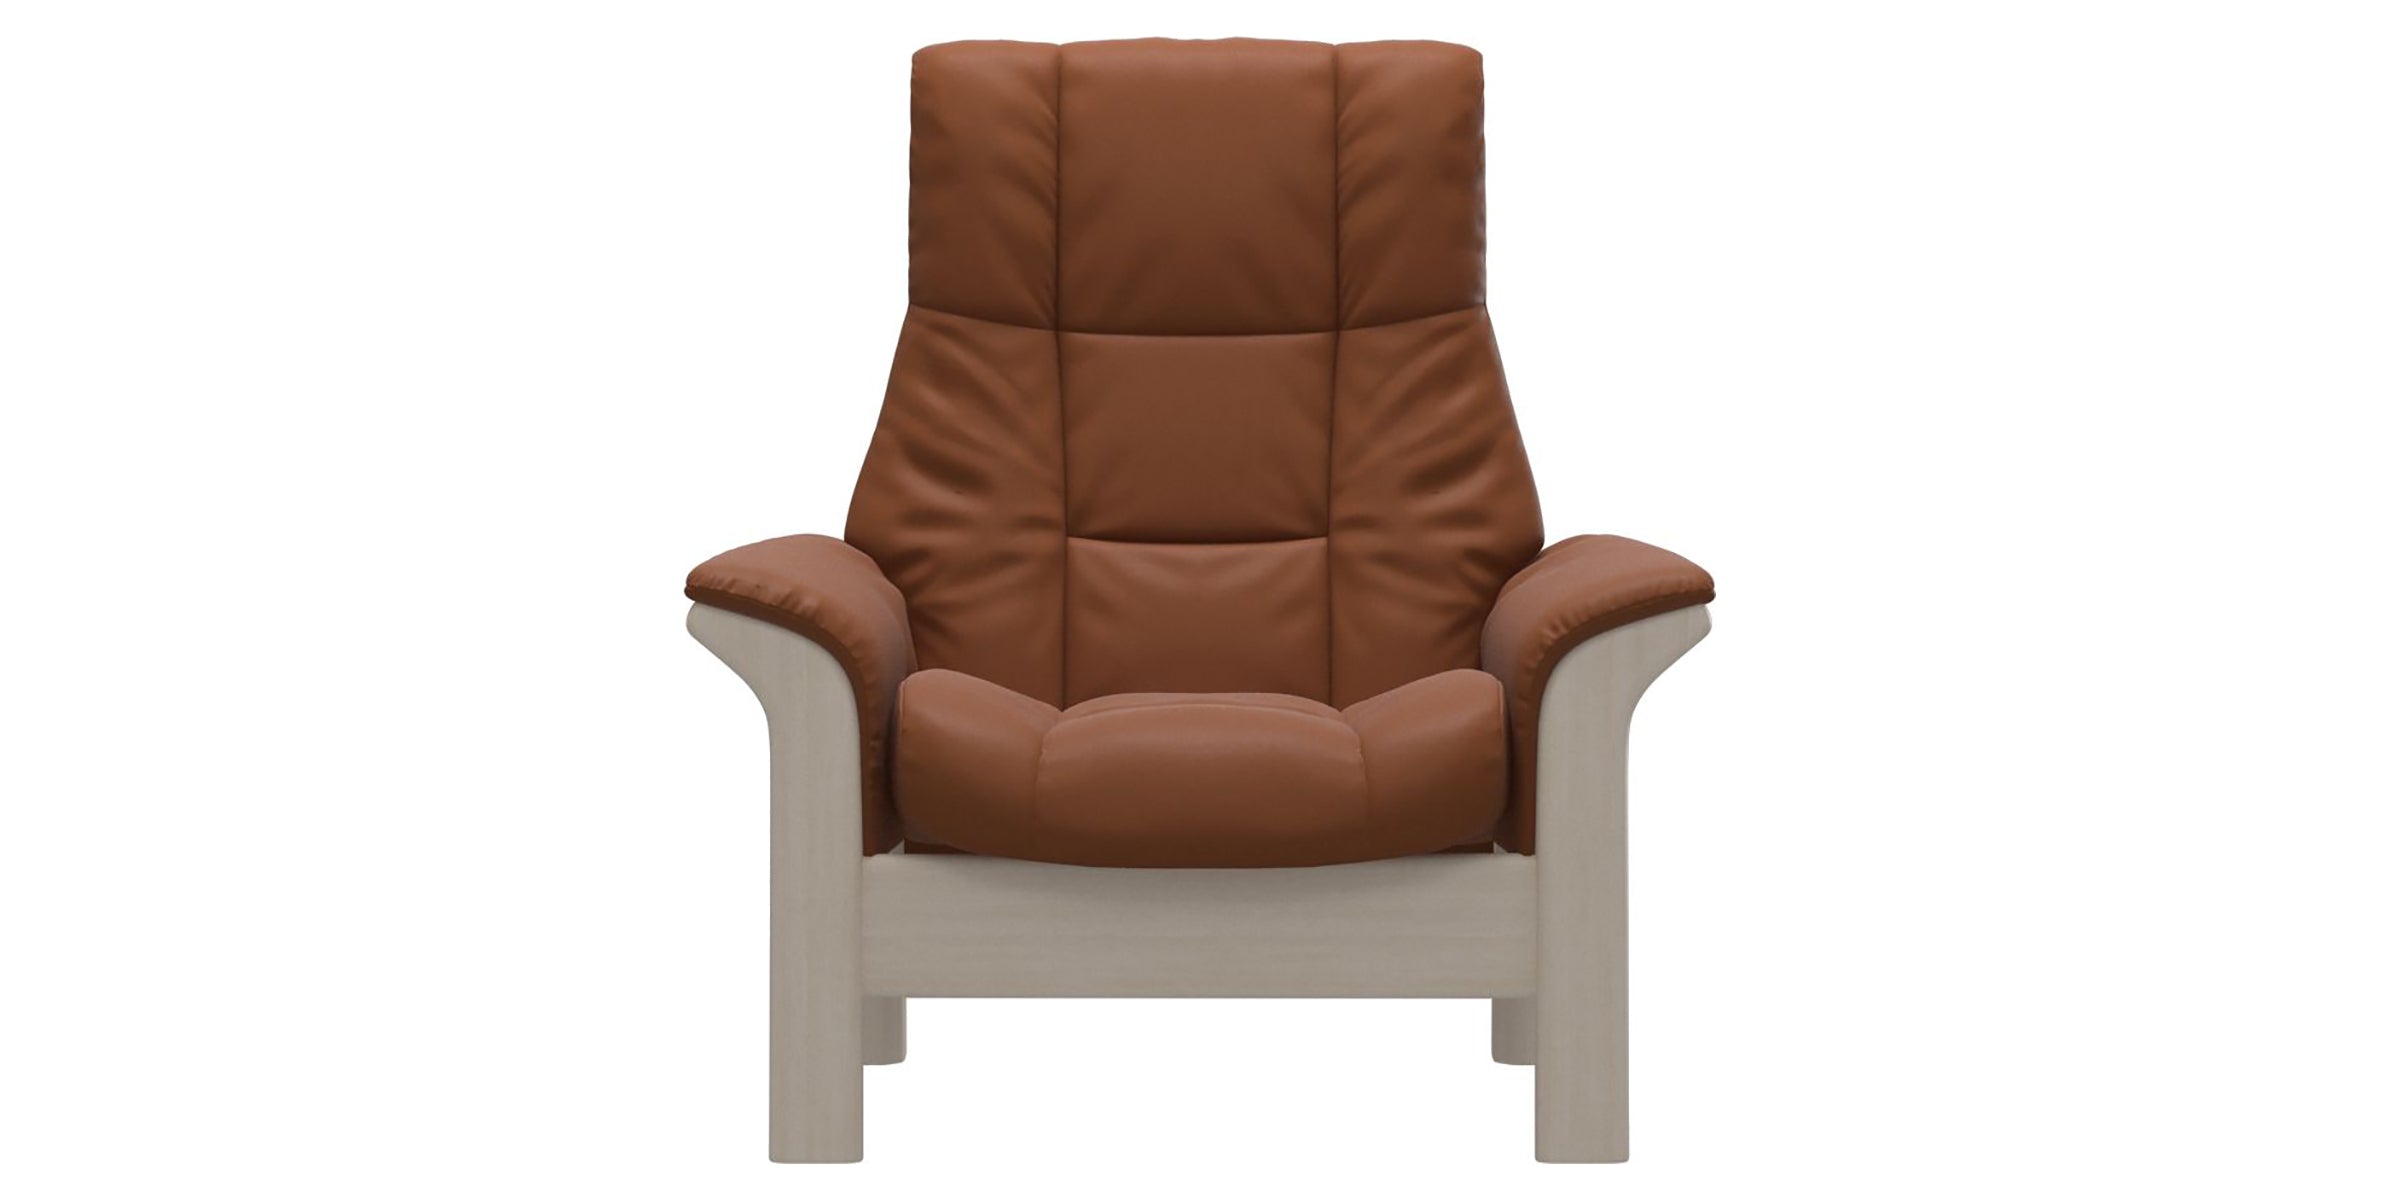 Paloma Leather New Cognac and Whitewash Base | Stressless Windsor High Back Chair | Valley Ridge Furniture